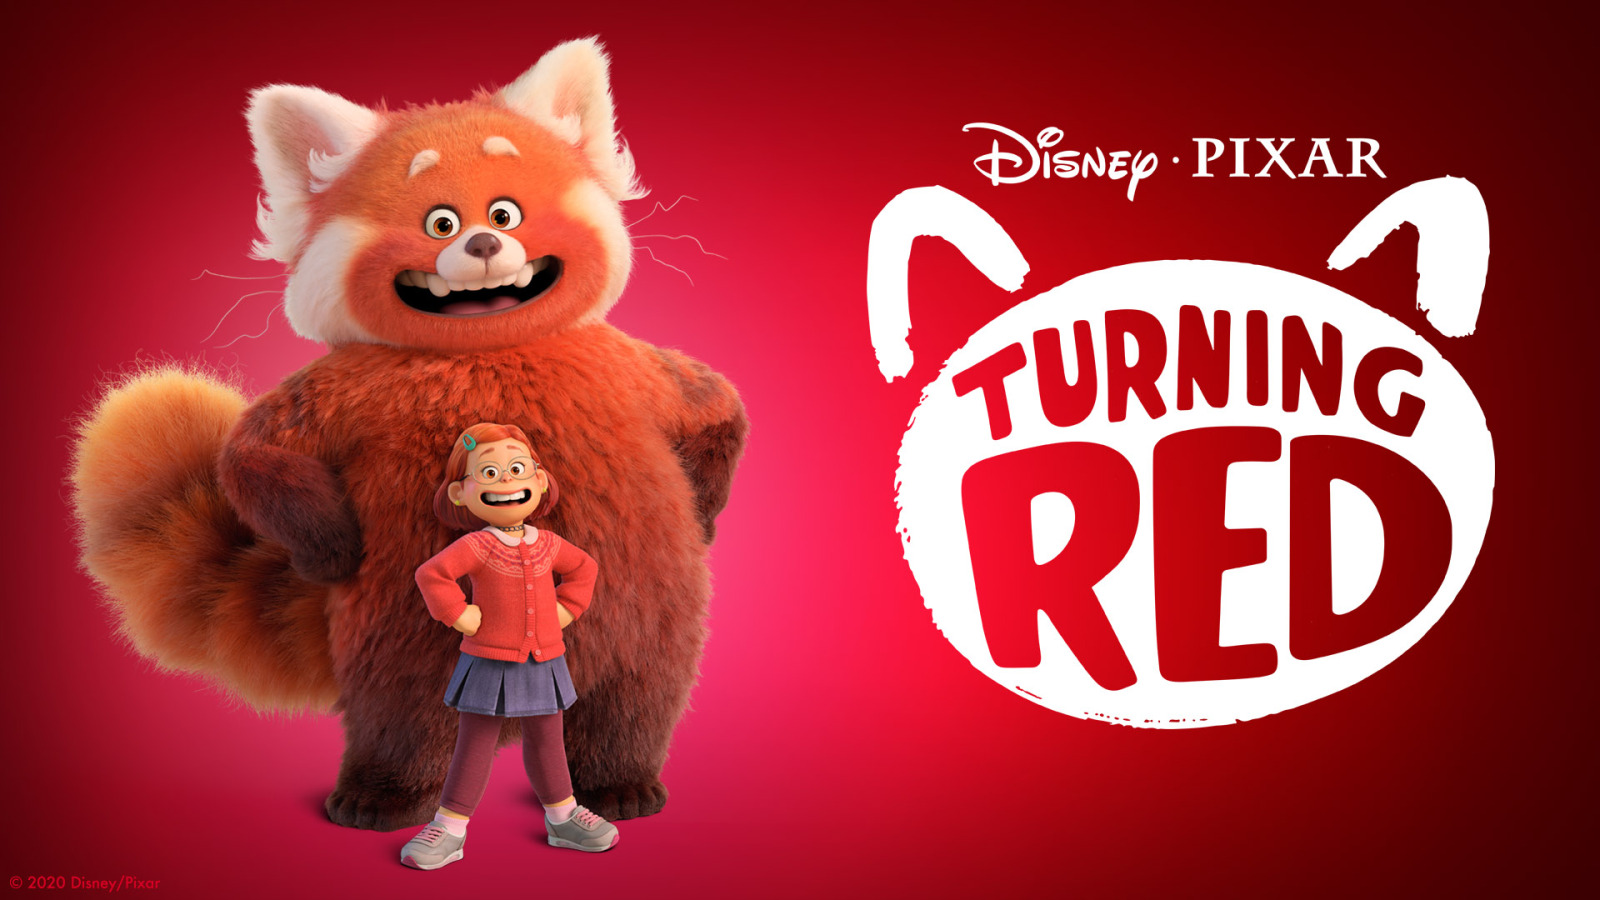 Turning Red movie cast: Who stars in the Disney+ movie?